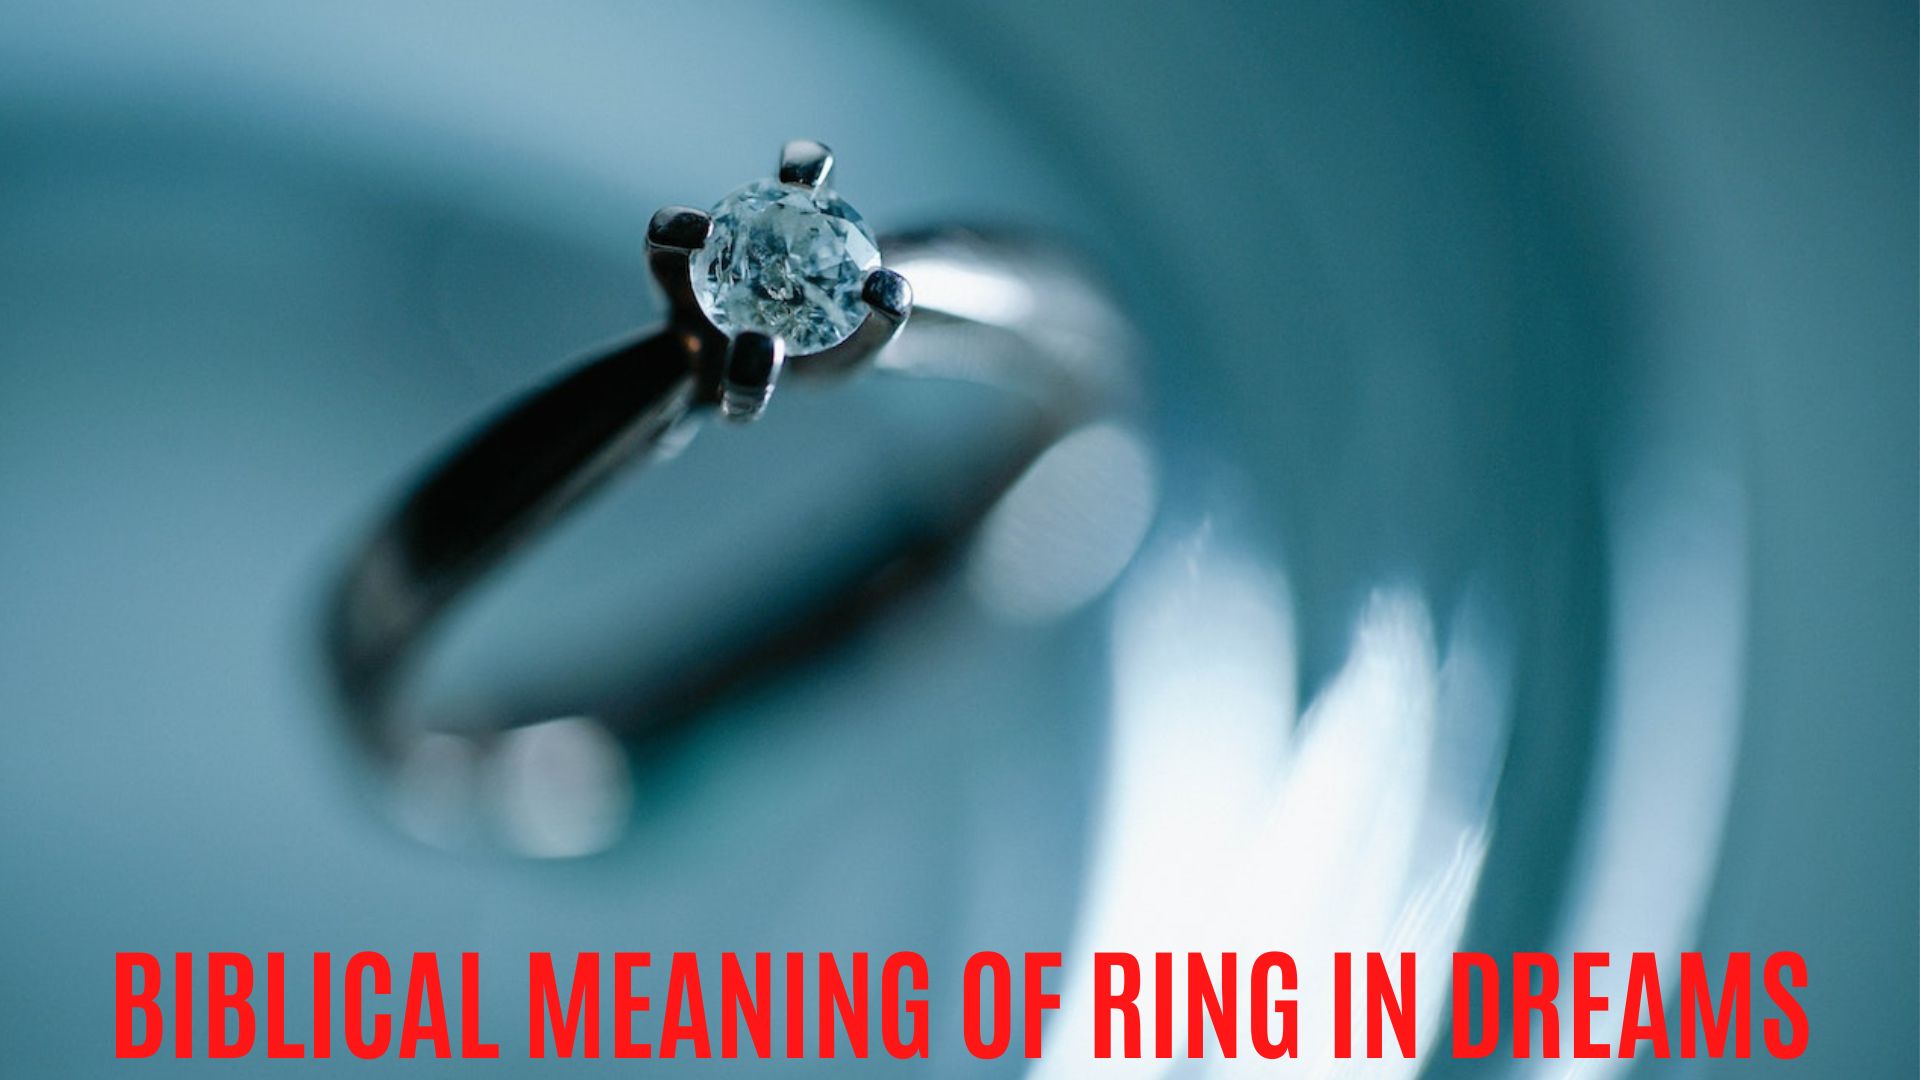 Biblical Meaning Of Ring In Dreams - Symbolize Riches, Wealth, And Blessings